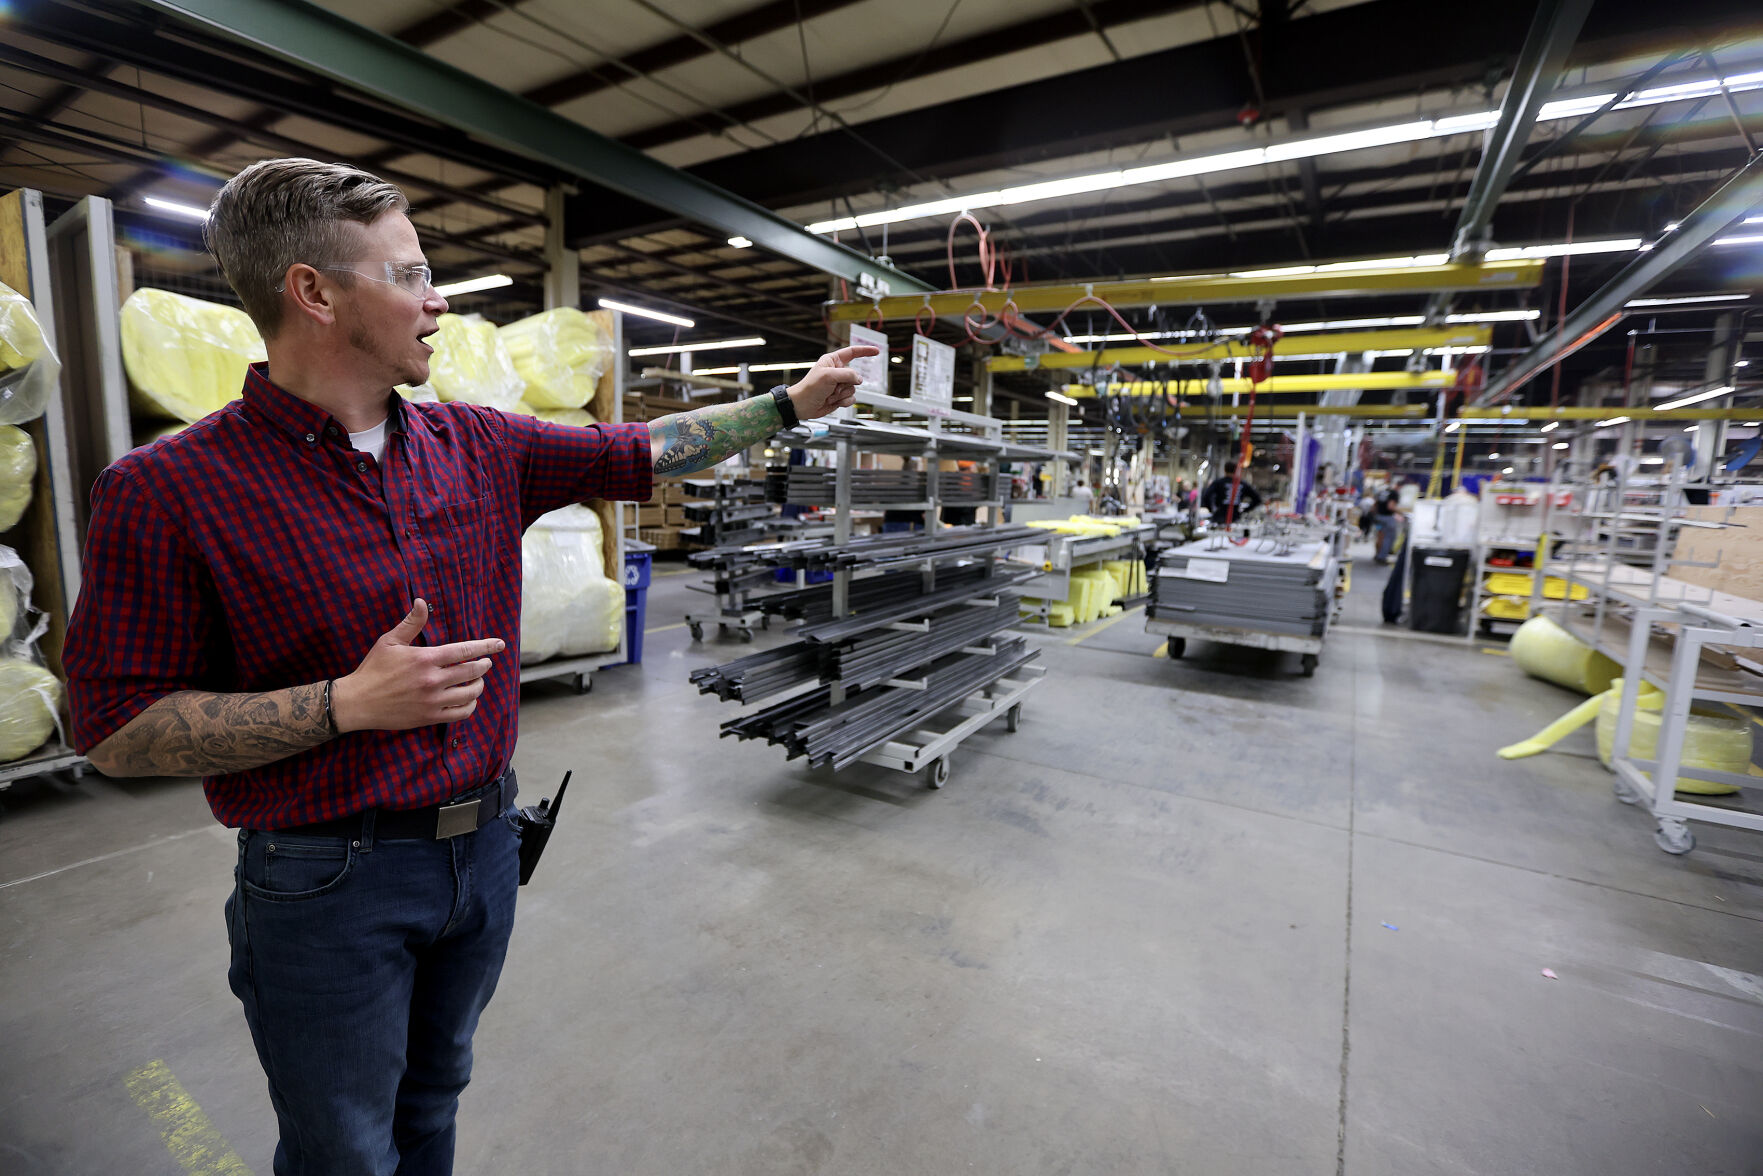 Jesse Blad, operations director at Modernfold, talks about the assembly lines at the company located in Dyersville, Iowa.    PHOTO CREDIT: Dave Kettering Telegraph Herald